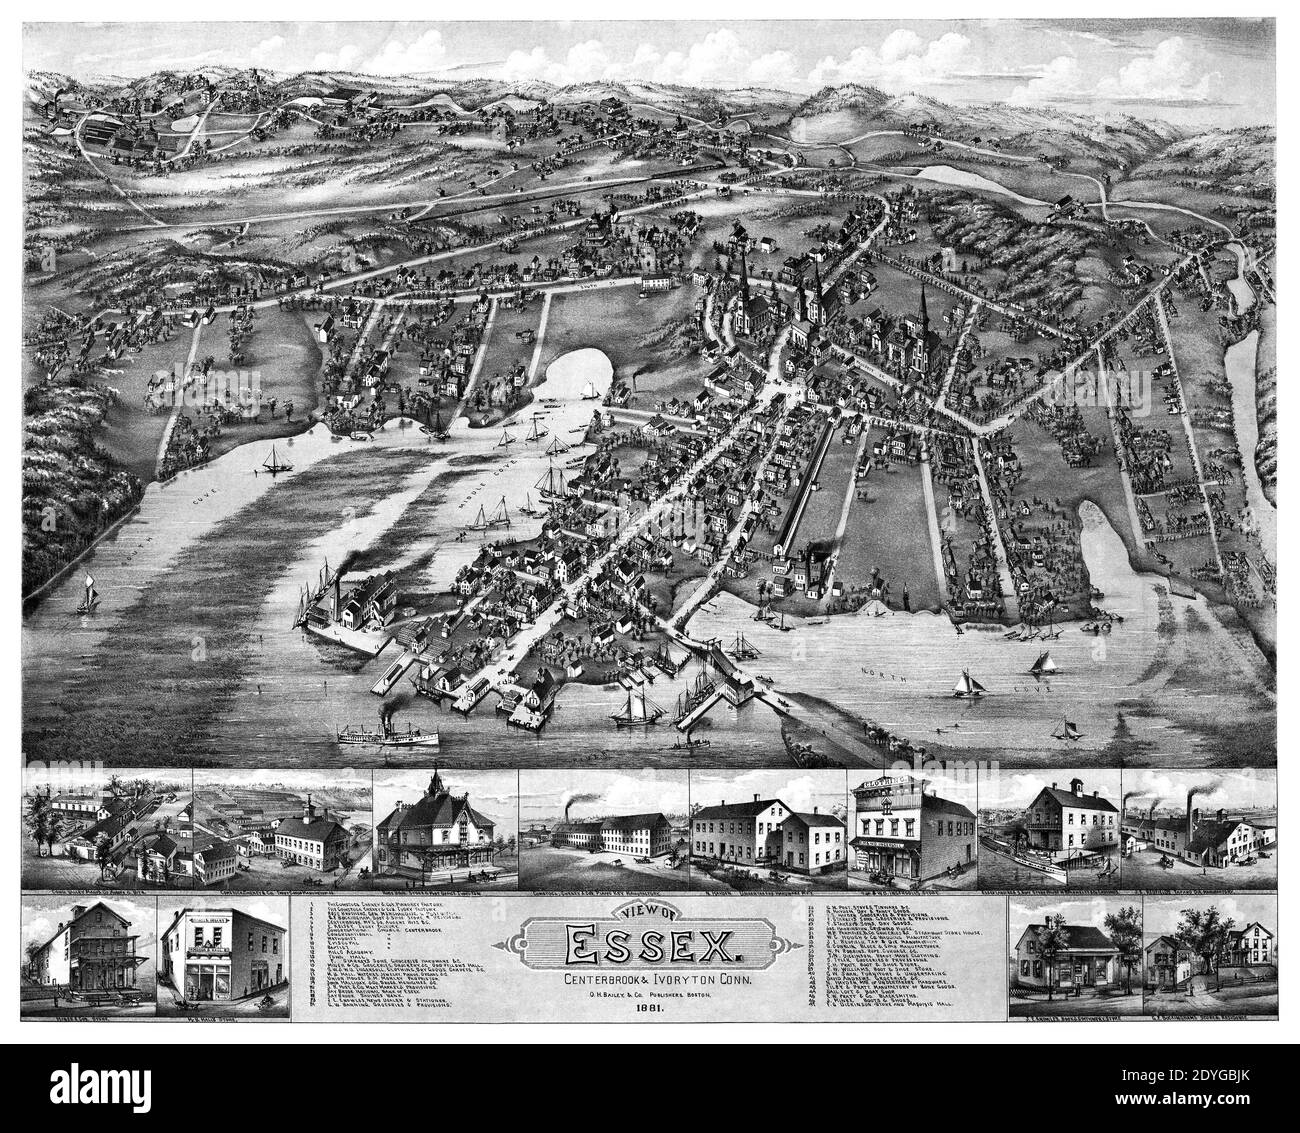 Perspective or birds-eye view of Essex, Centerbrook & Ivoryton, Connecticut, from 1881 antique map. Stock Photo